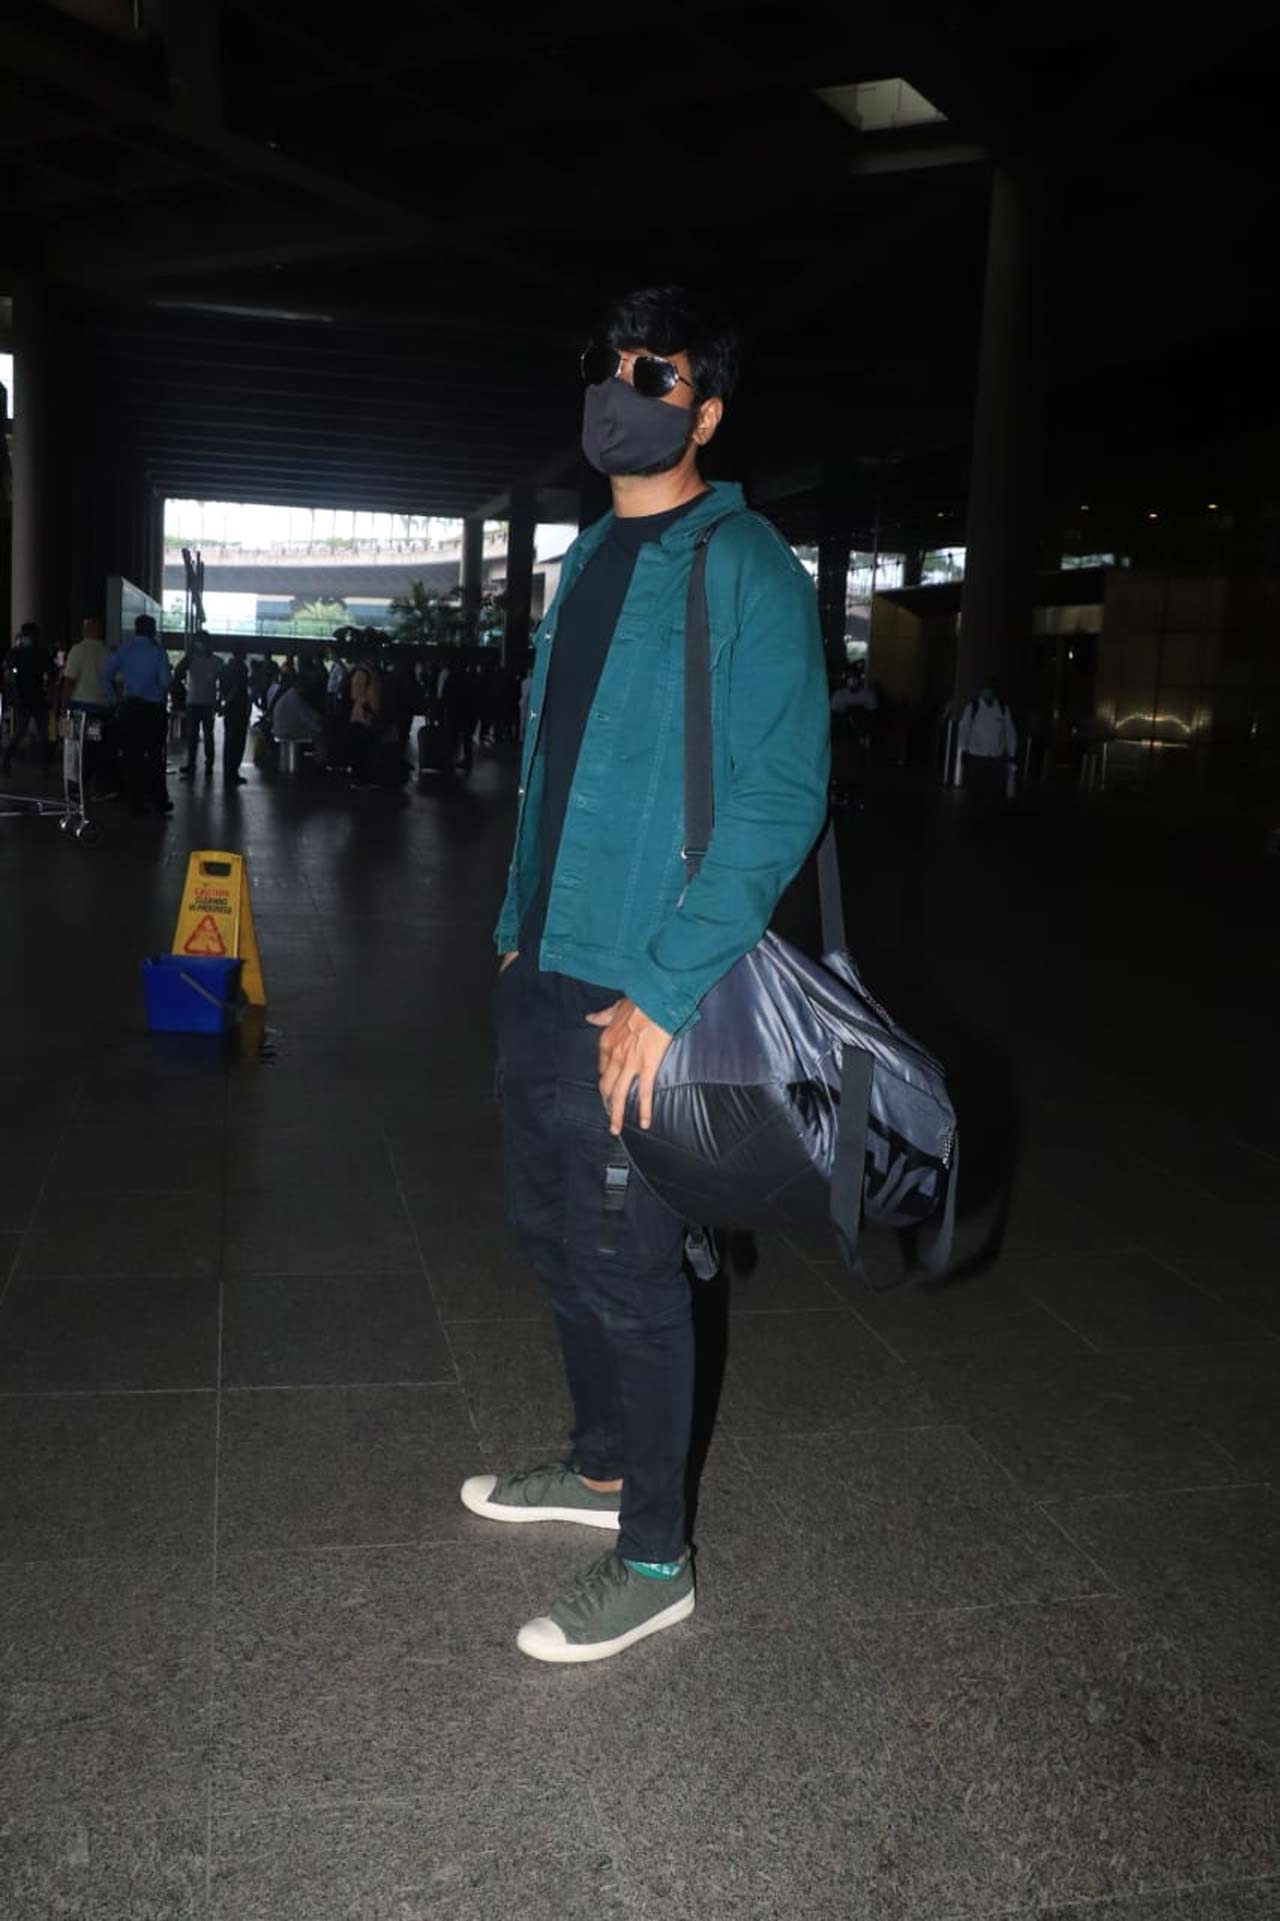 Popular actor Sundeep Kishan was also spotted at the Mumbai airport.